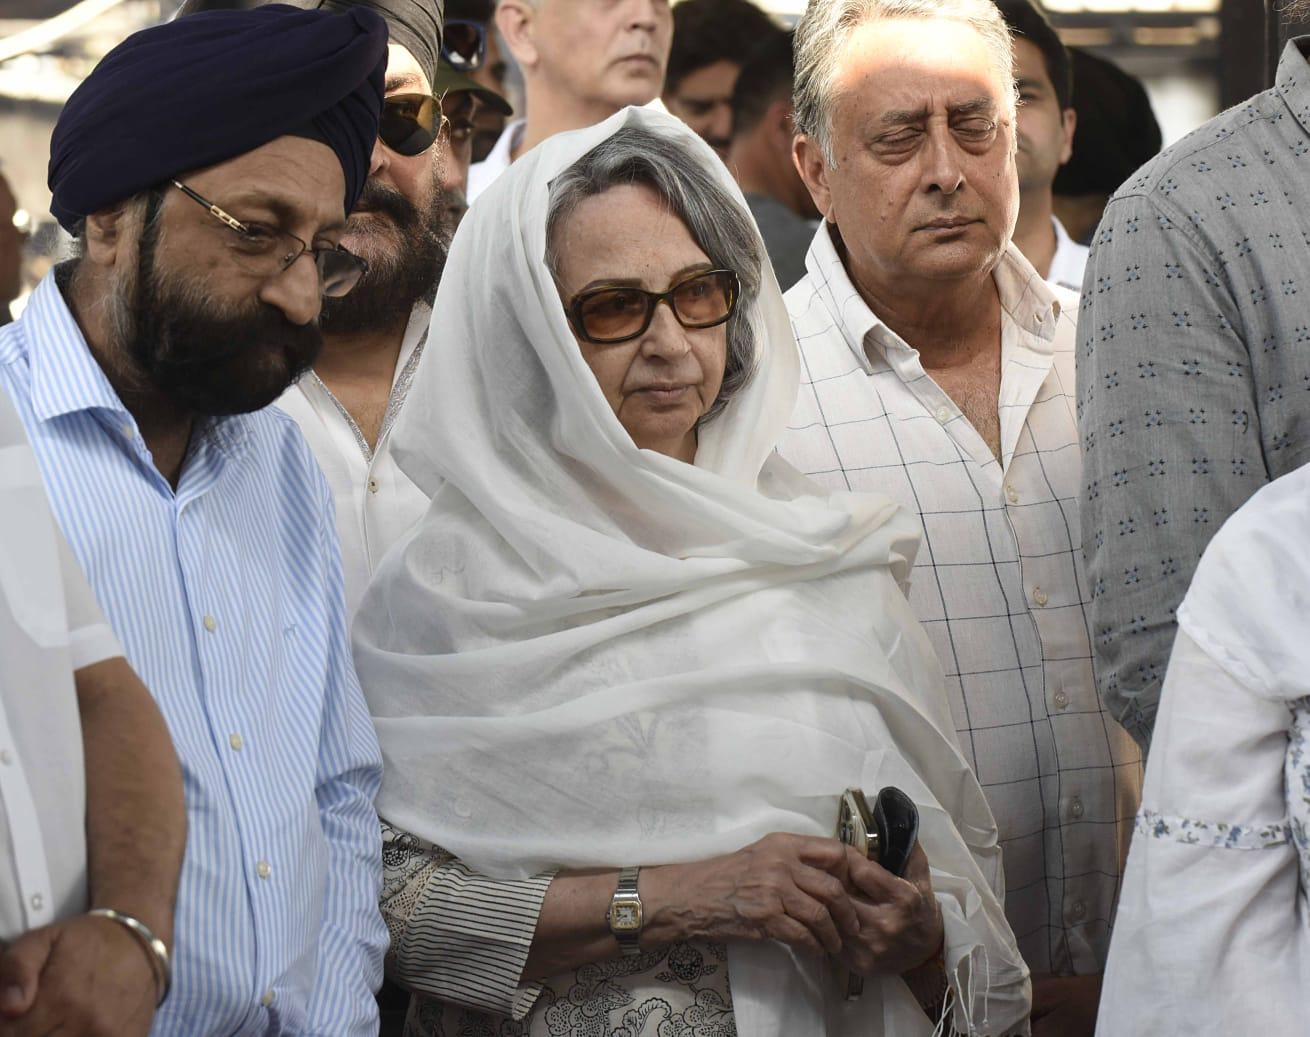 Actress Sharmila Tagore also attended the funeral of the former cricketer